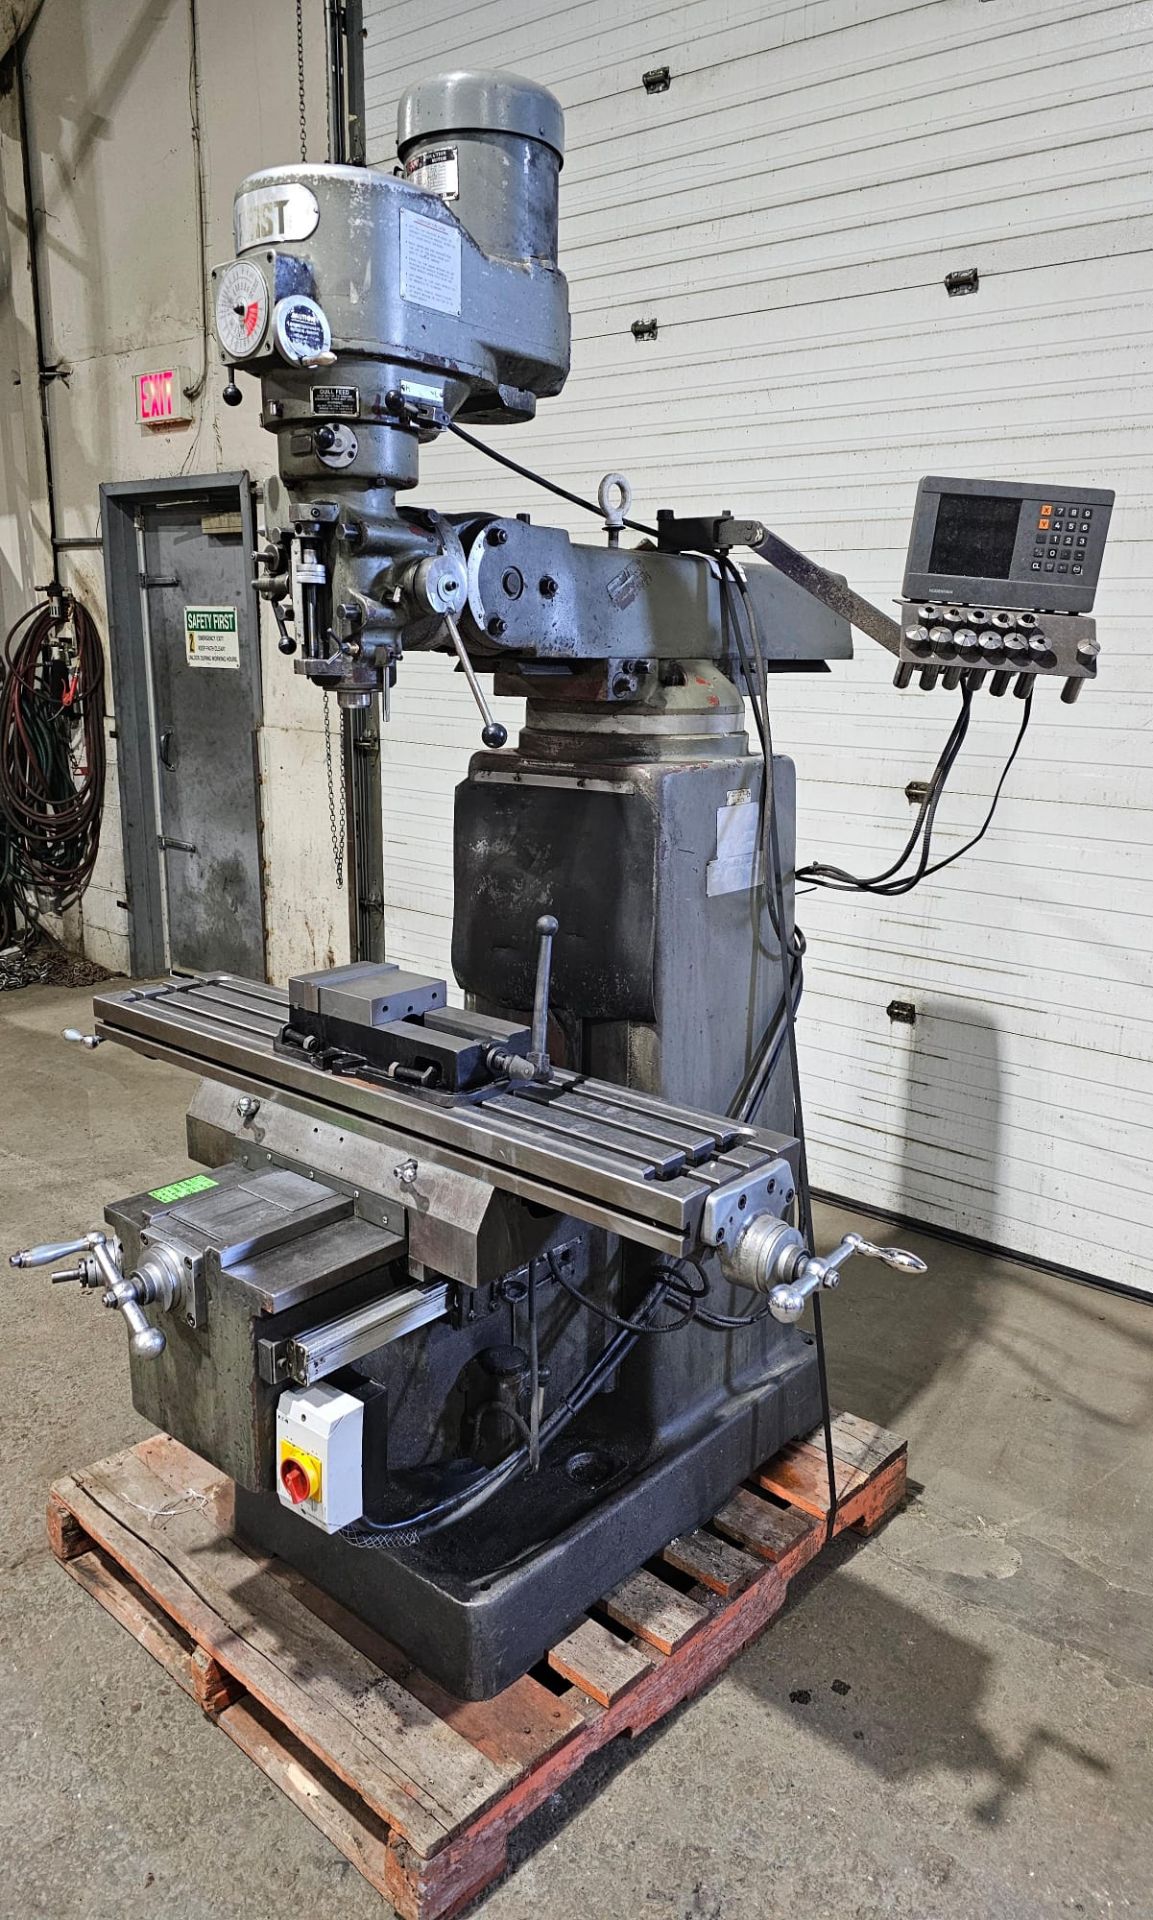 2008 FIRST MILLING MACHINE mode lC-1-1/2VS With brand new 6" accu-lock machine vice 3 phase - Image 4 of 7